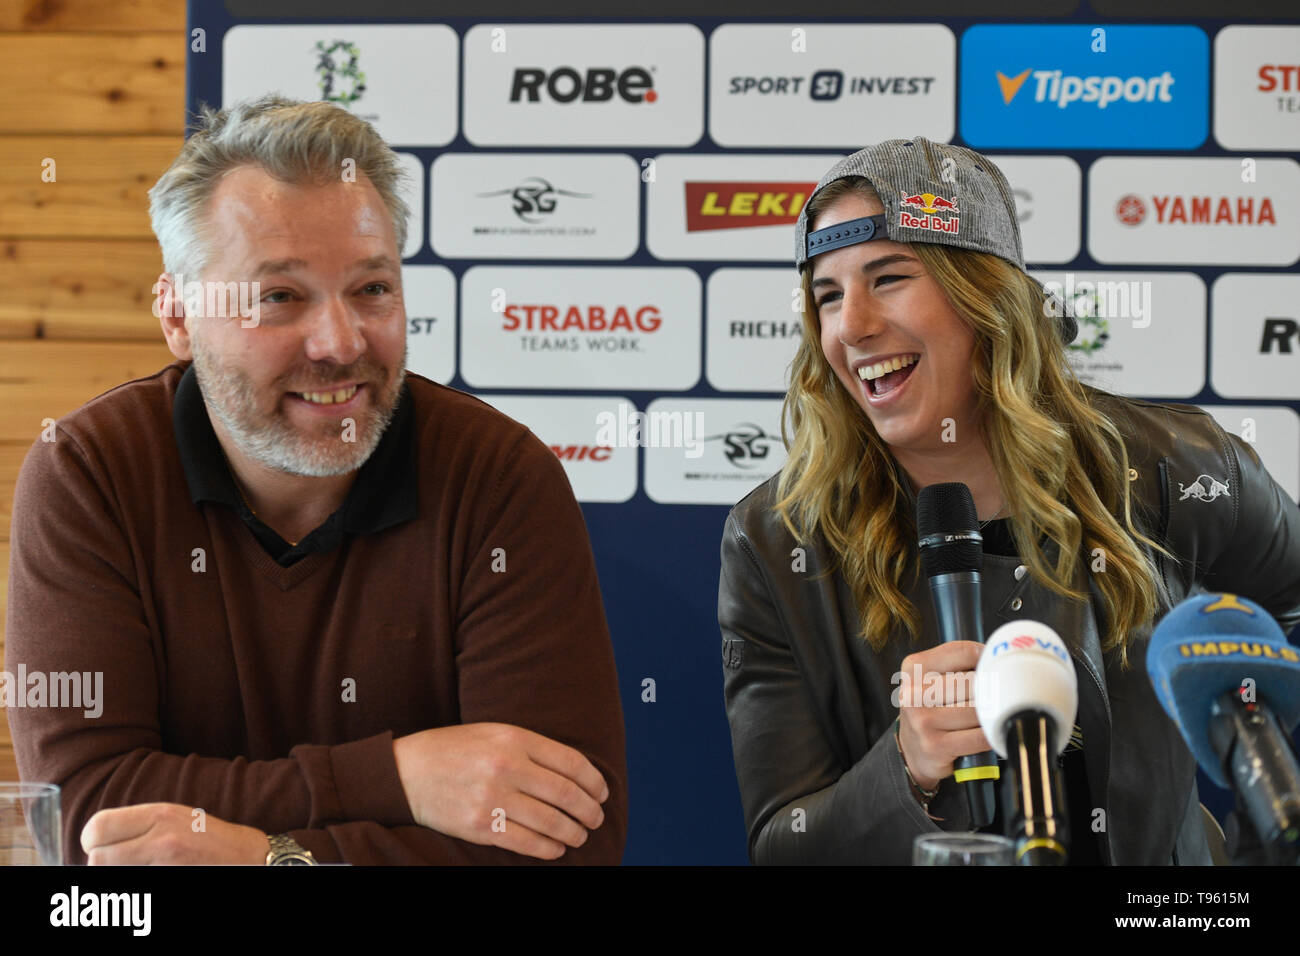 Prague, Czech Republic. 17th May, 2019. Czech snowboarder and alpine skier  Ester Ledecka, right, and her coach Tomas Bank smile during a meeting with  journalists in Prague, Czech Republic, on May 17,